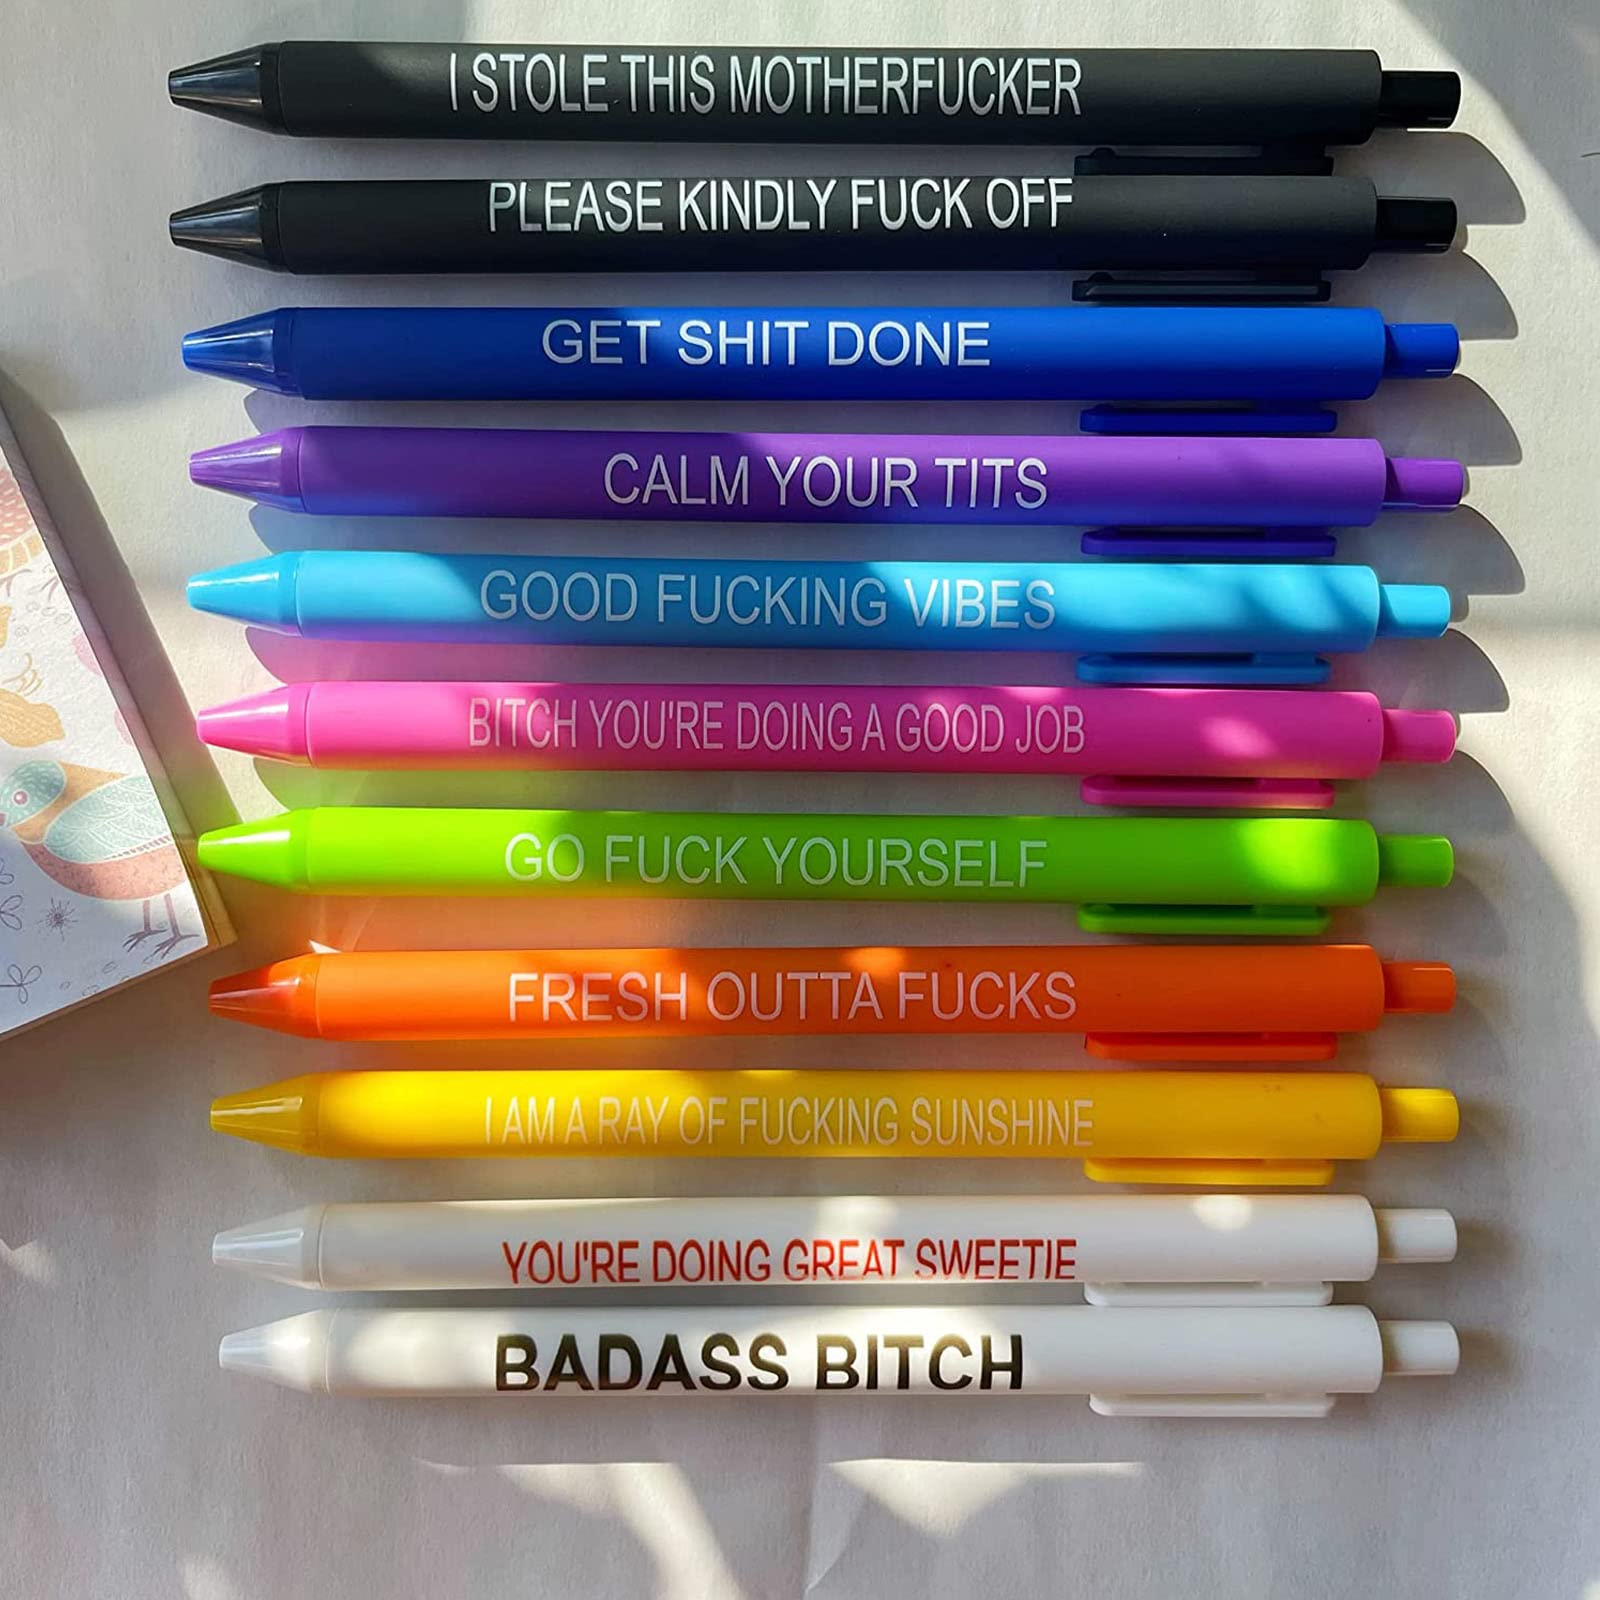 11pcs Ballpoint Pen Black Ink Pens With Funny Sayings Novelty